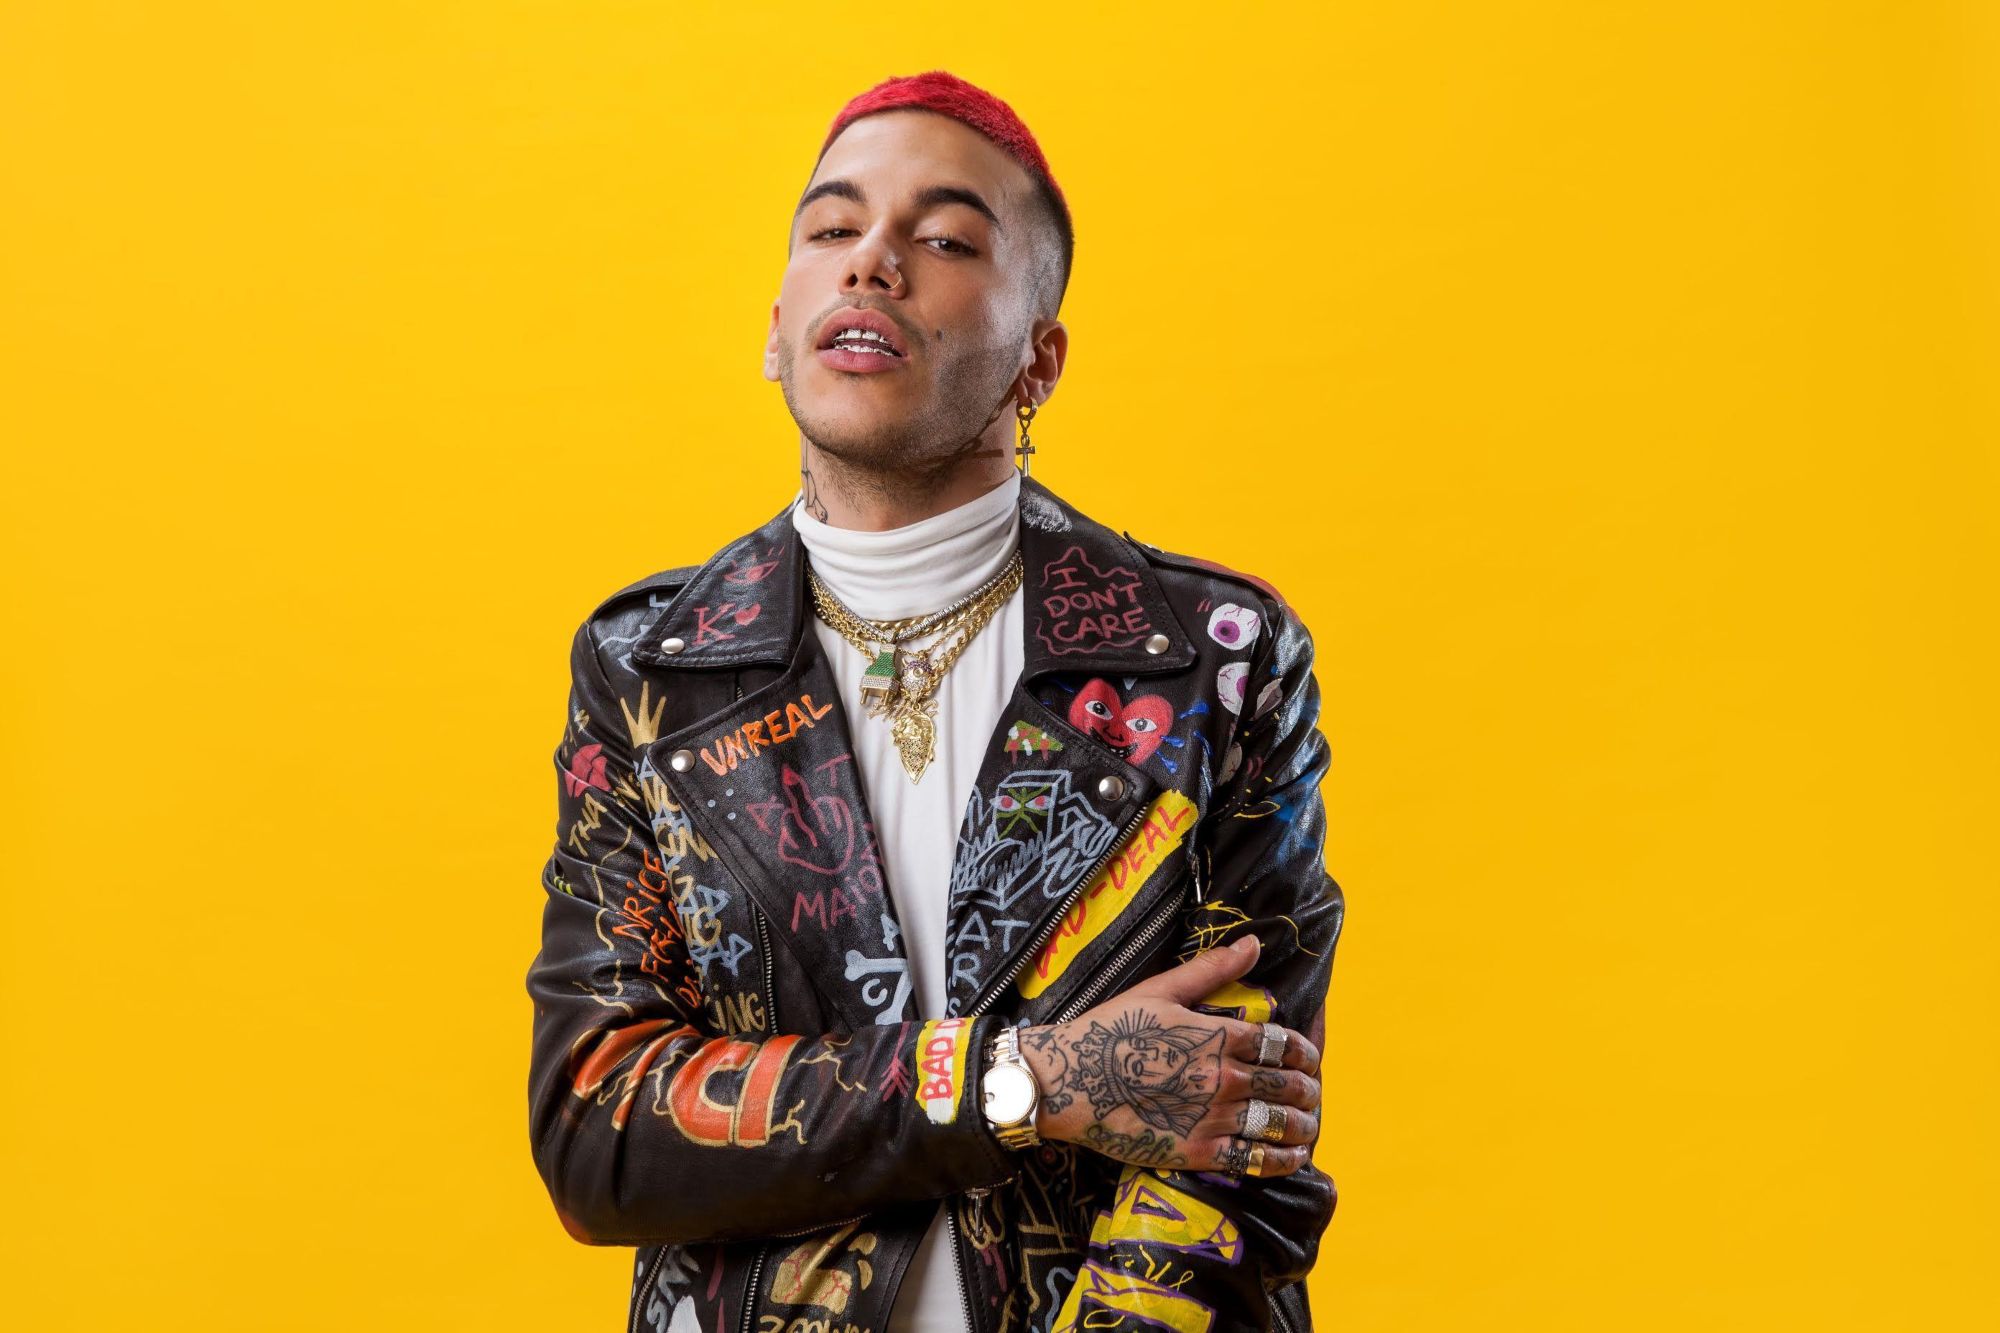 12 Mind-blowing Facts About Sfera Ebbasta 